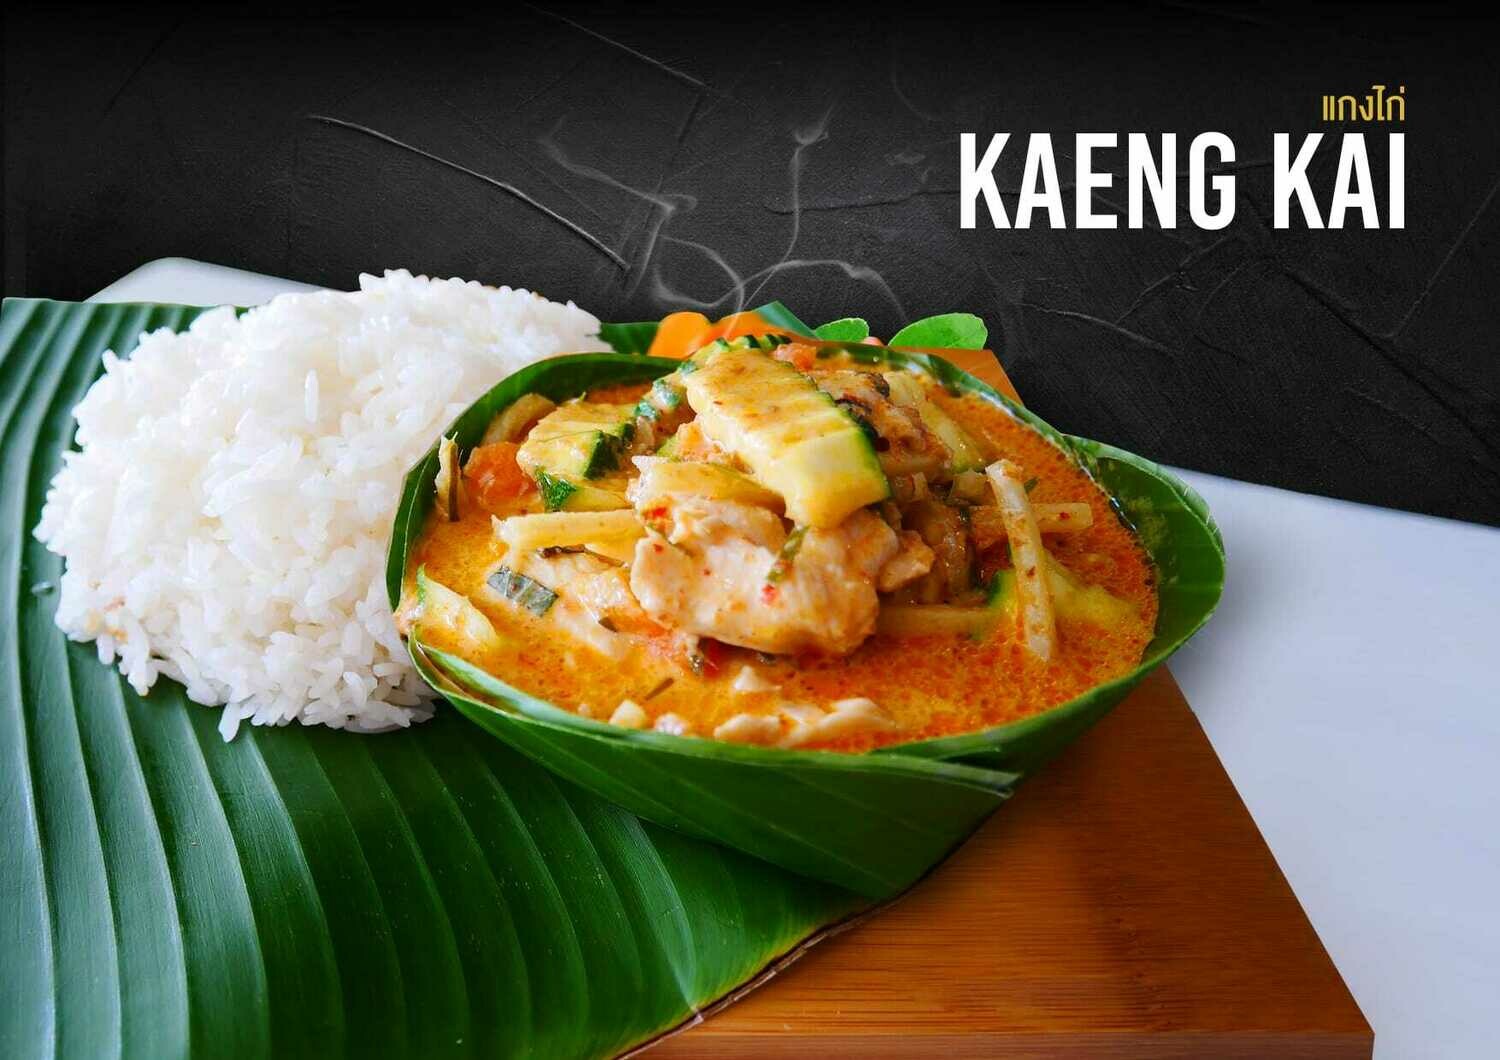 KAENG KAI - Poulet au curry rouge/vert Chicken curry red/green